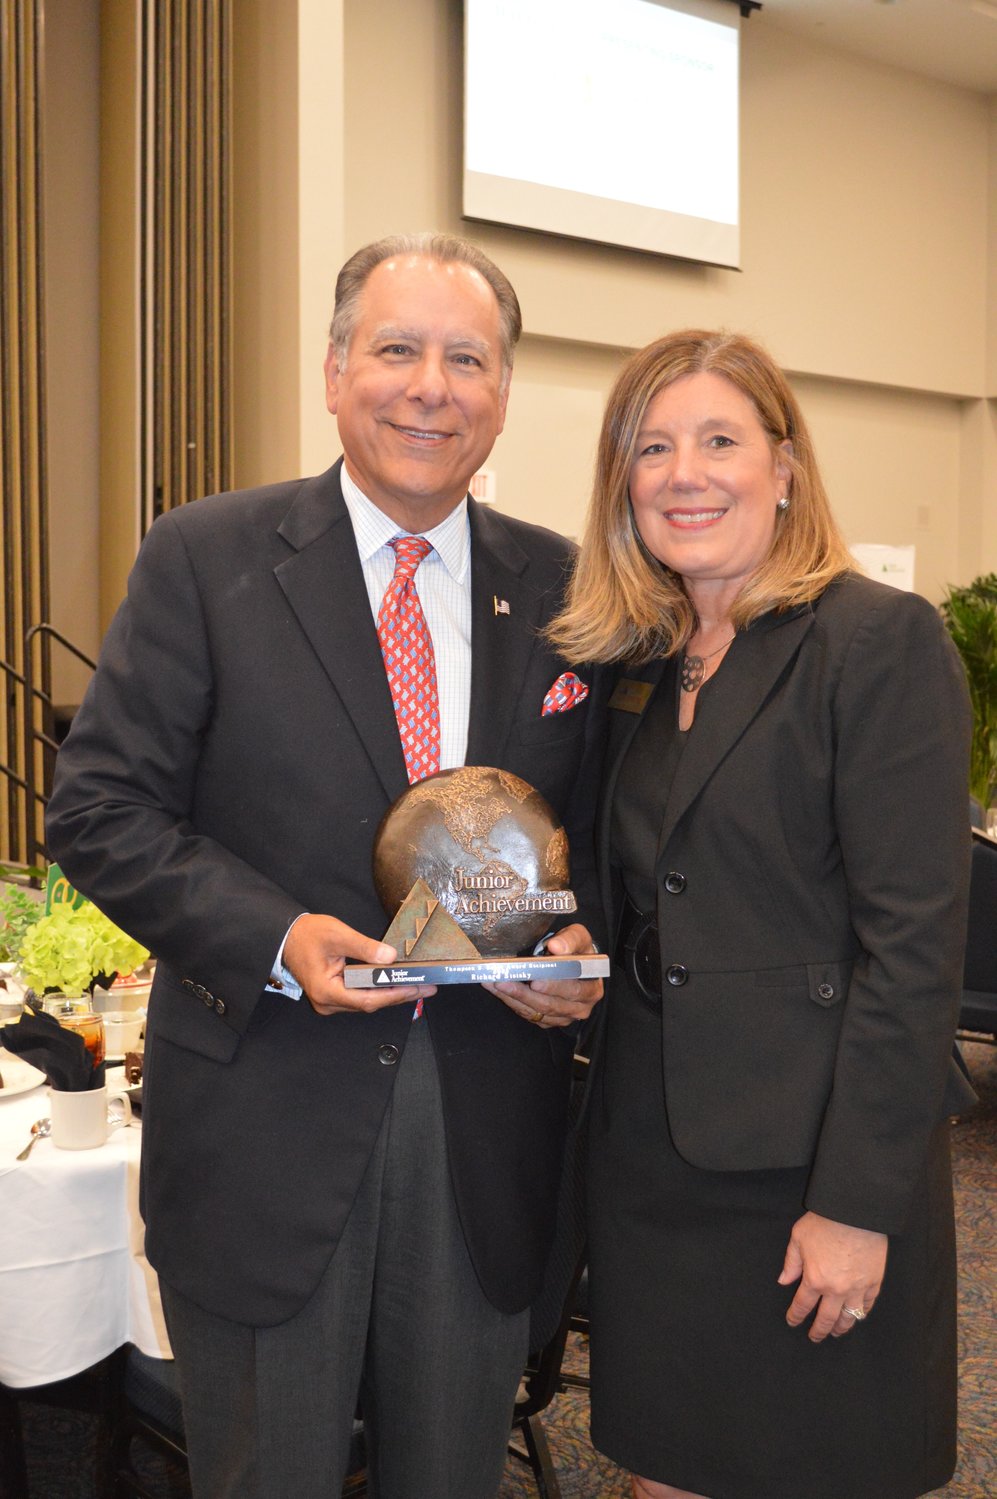 Richard Sisisky and JA of North Florida President Shannon Italia at the Junior Achievement of North Florida’s 2022 Hall of Fame Luncheon. Sisisky was presented the Thompson S. Baker “Solid As A Rock” Award.